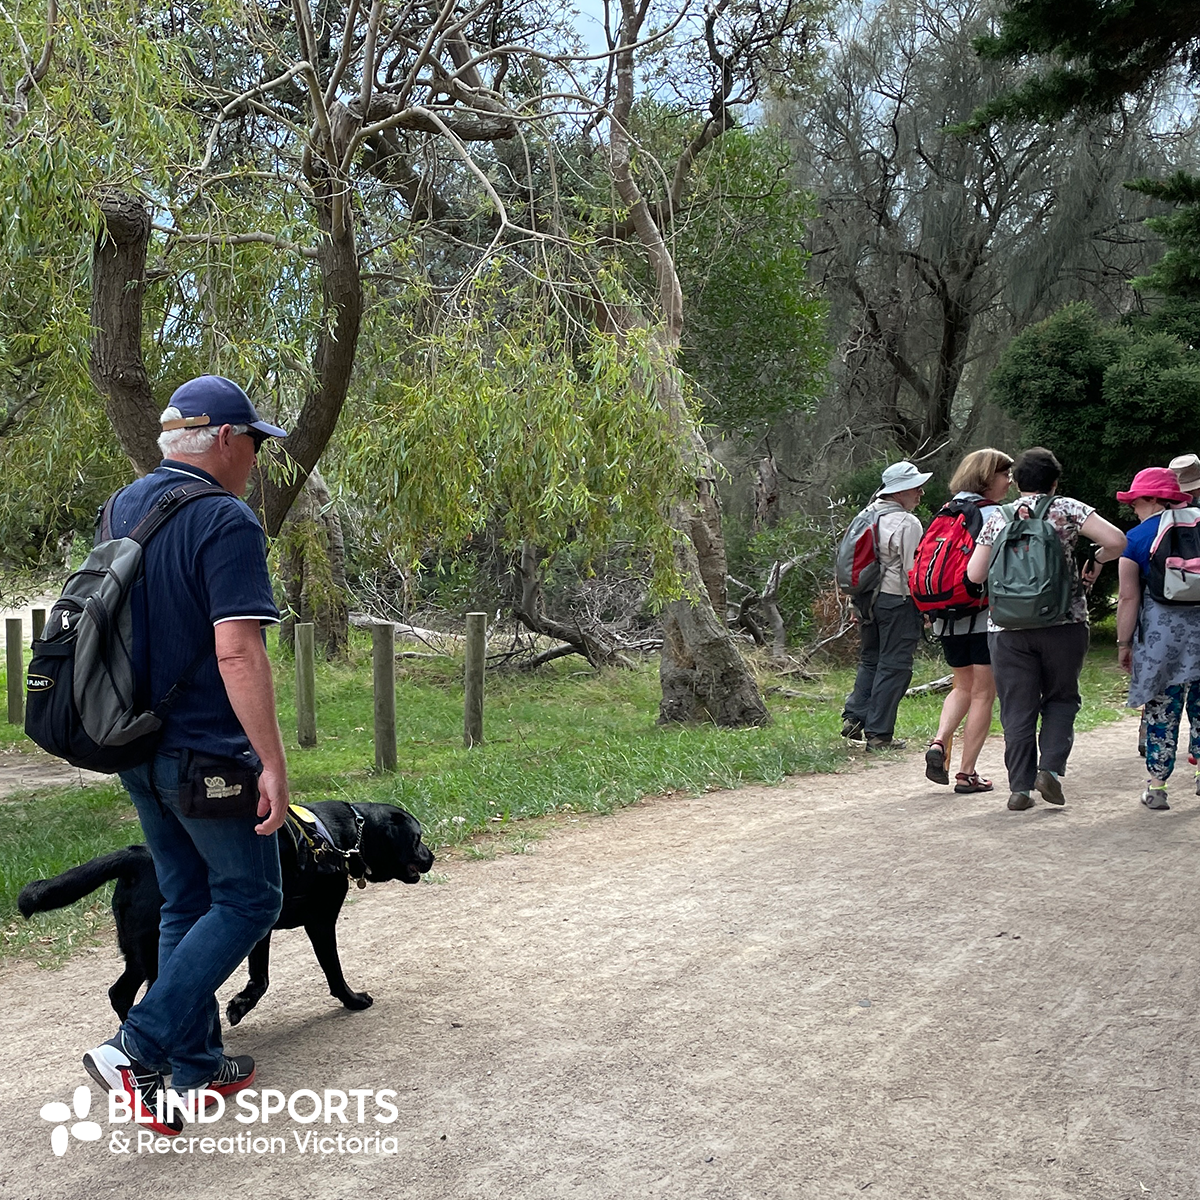 A path leading through the bush with walkers on a guided tour. A small group is up front with a man wearing a backpack and sensible shoes walking with their black Labrador guide dog.